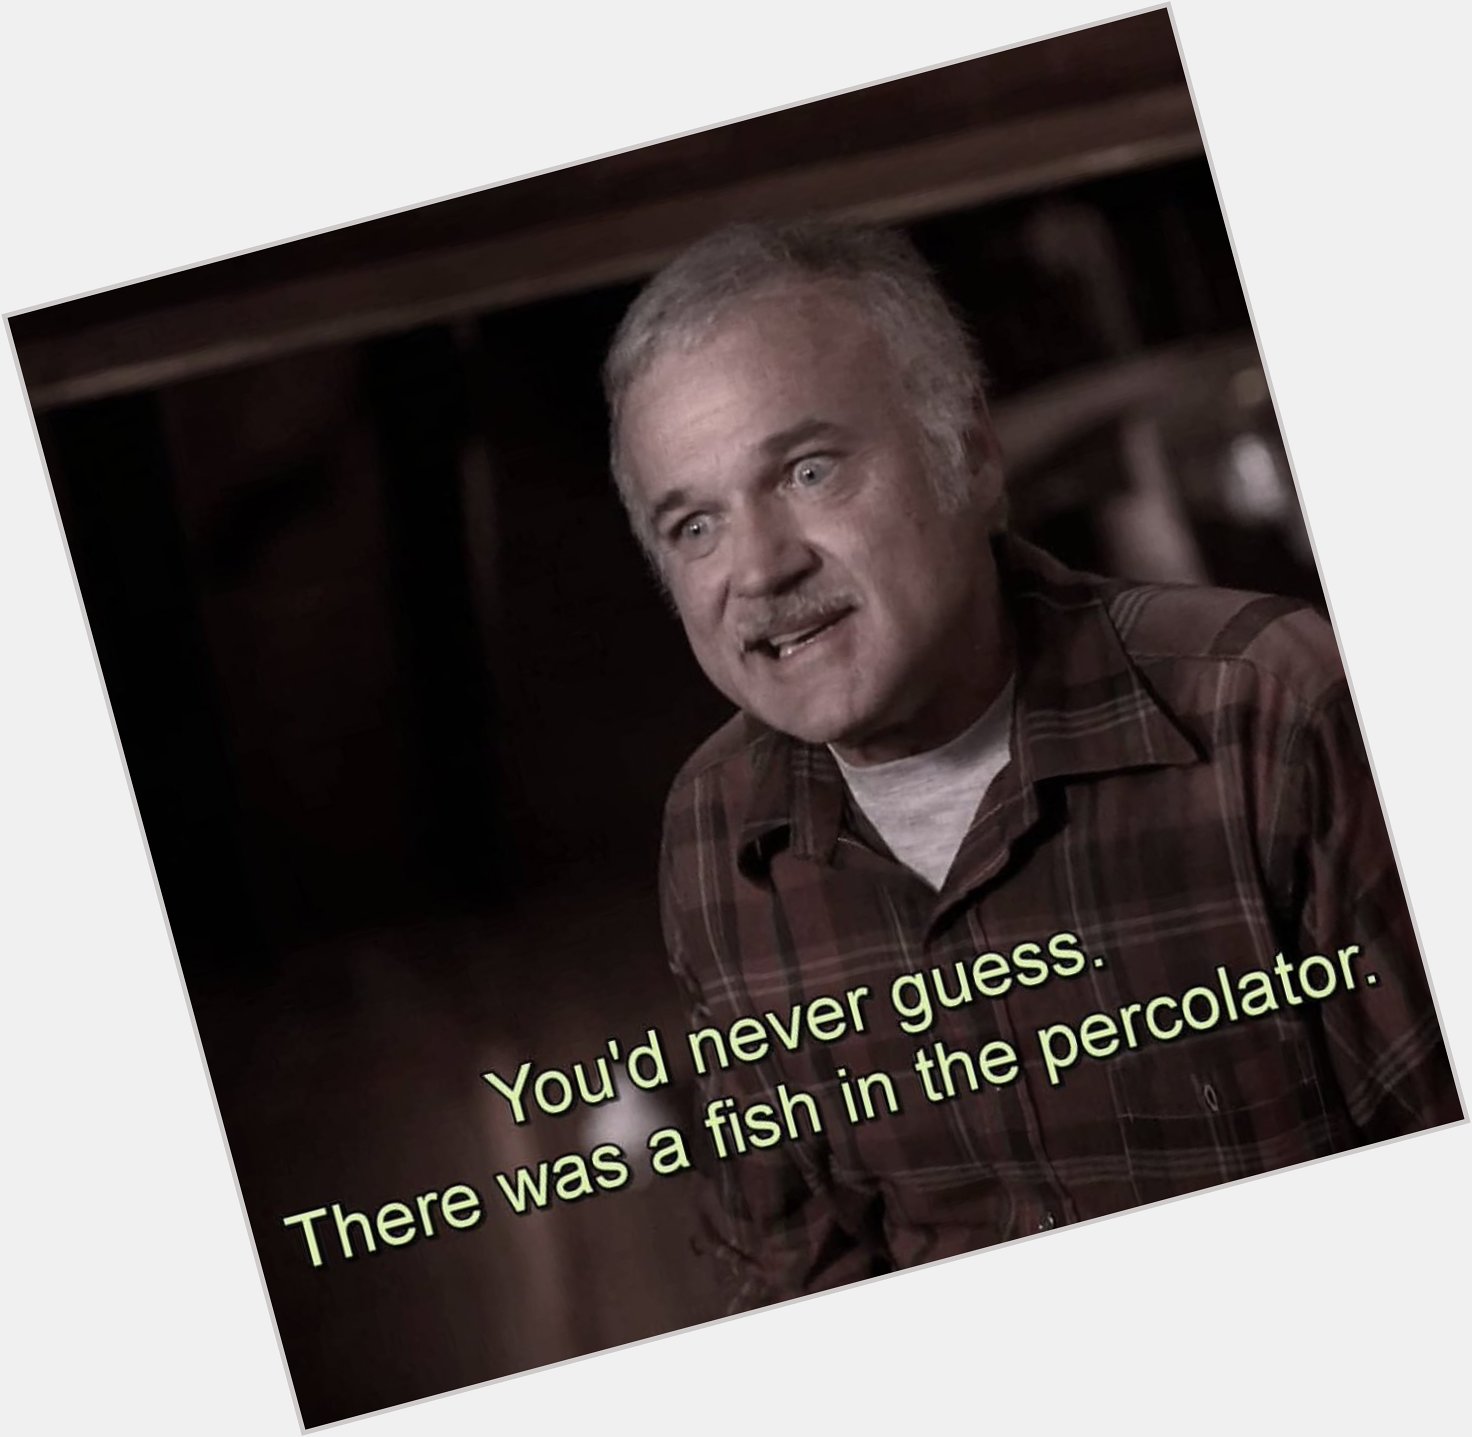 Happy birthday jack nance, we all miss you (cred 